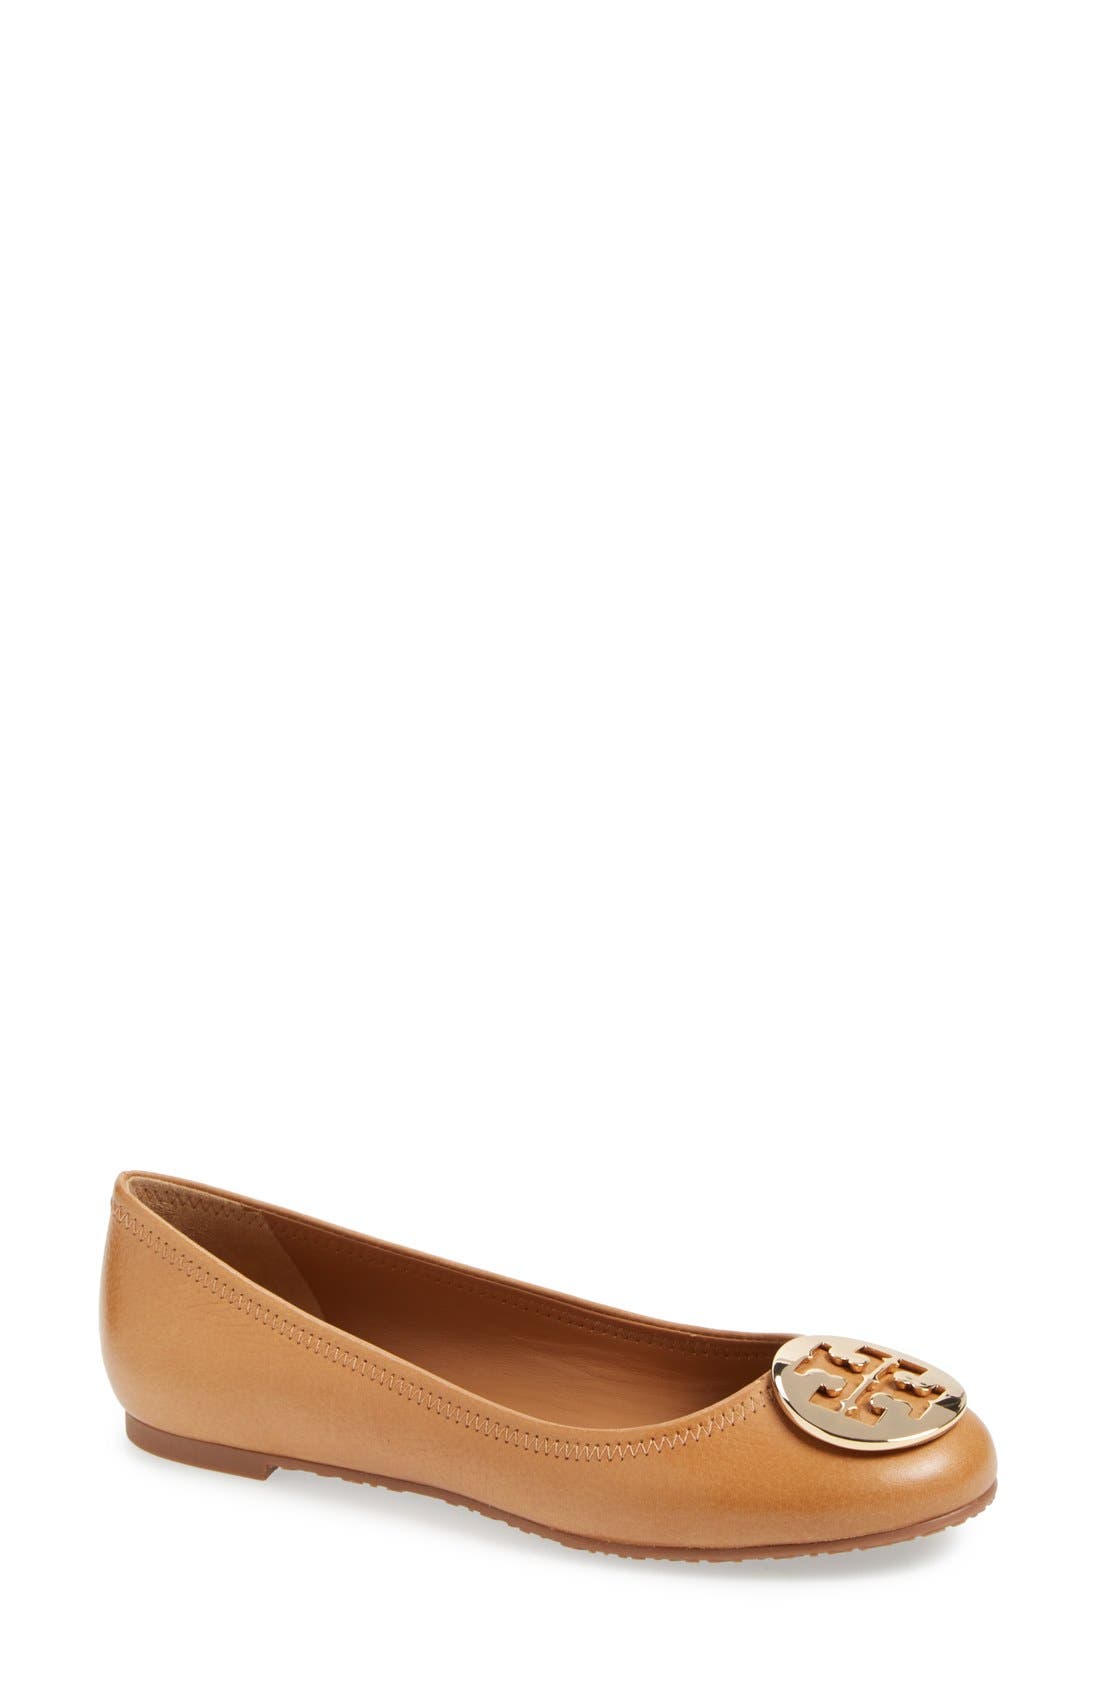 tory burch loafers nordstrom rack